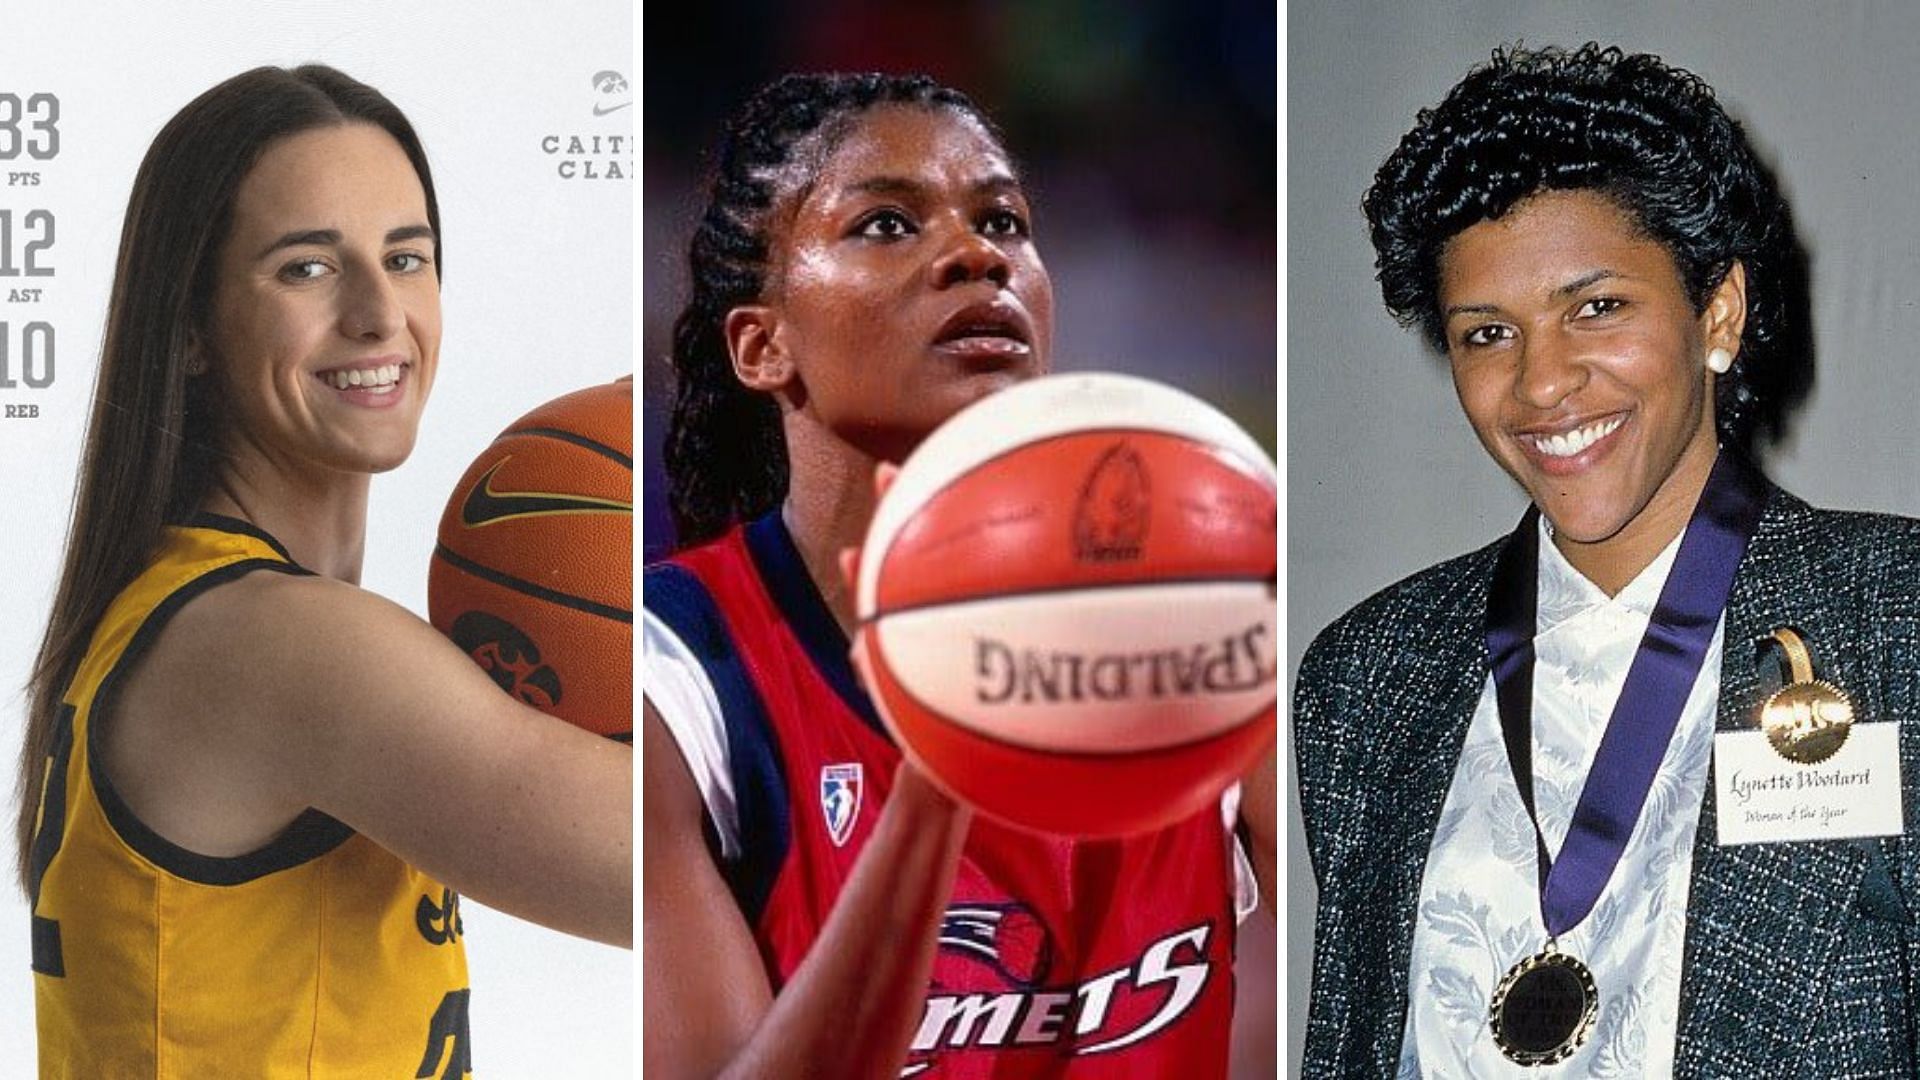 Caitlin Clark, Sheryl Swoopes, and Lynette Woodard